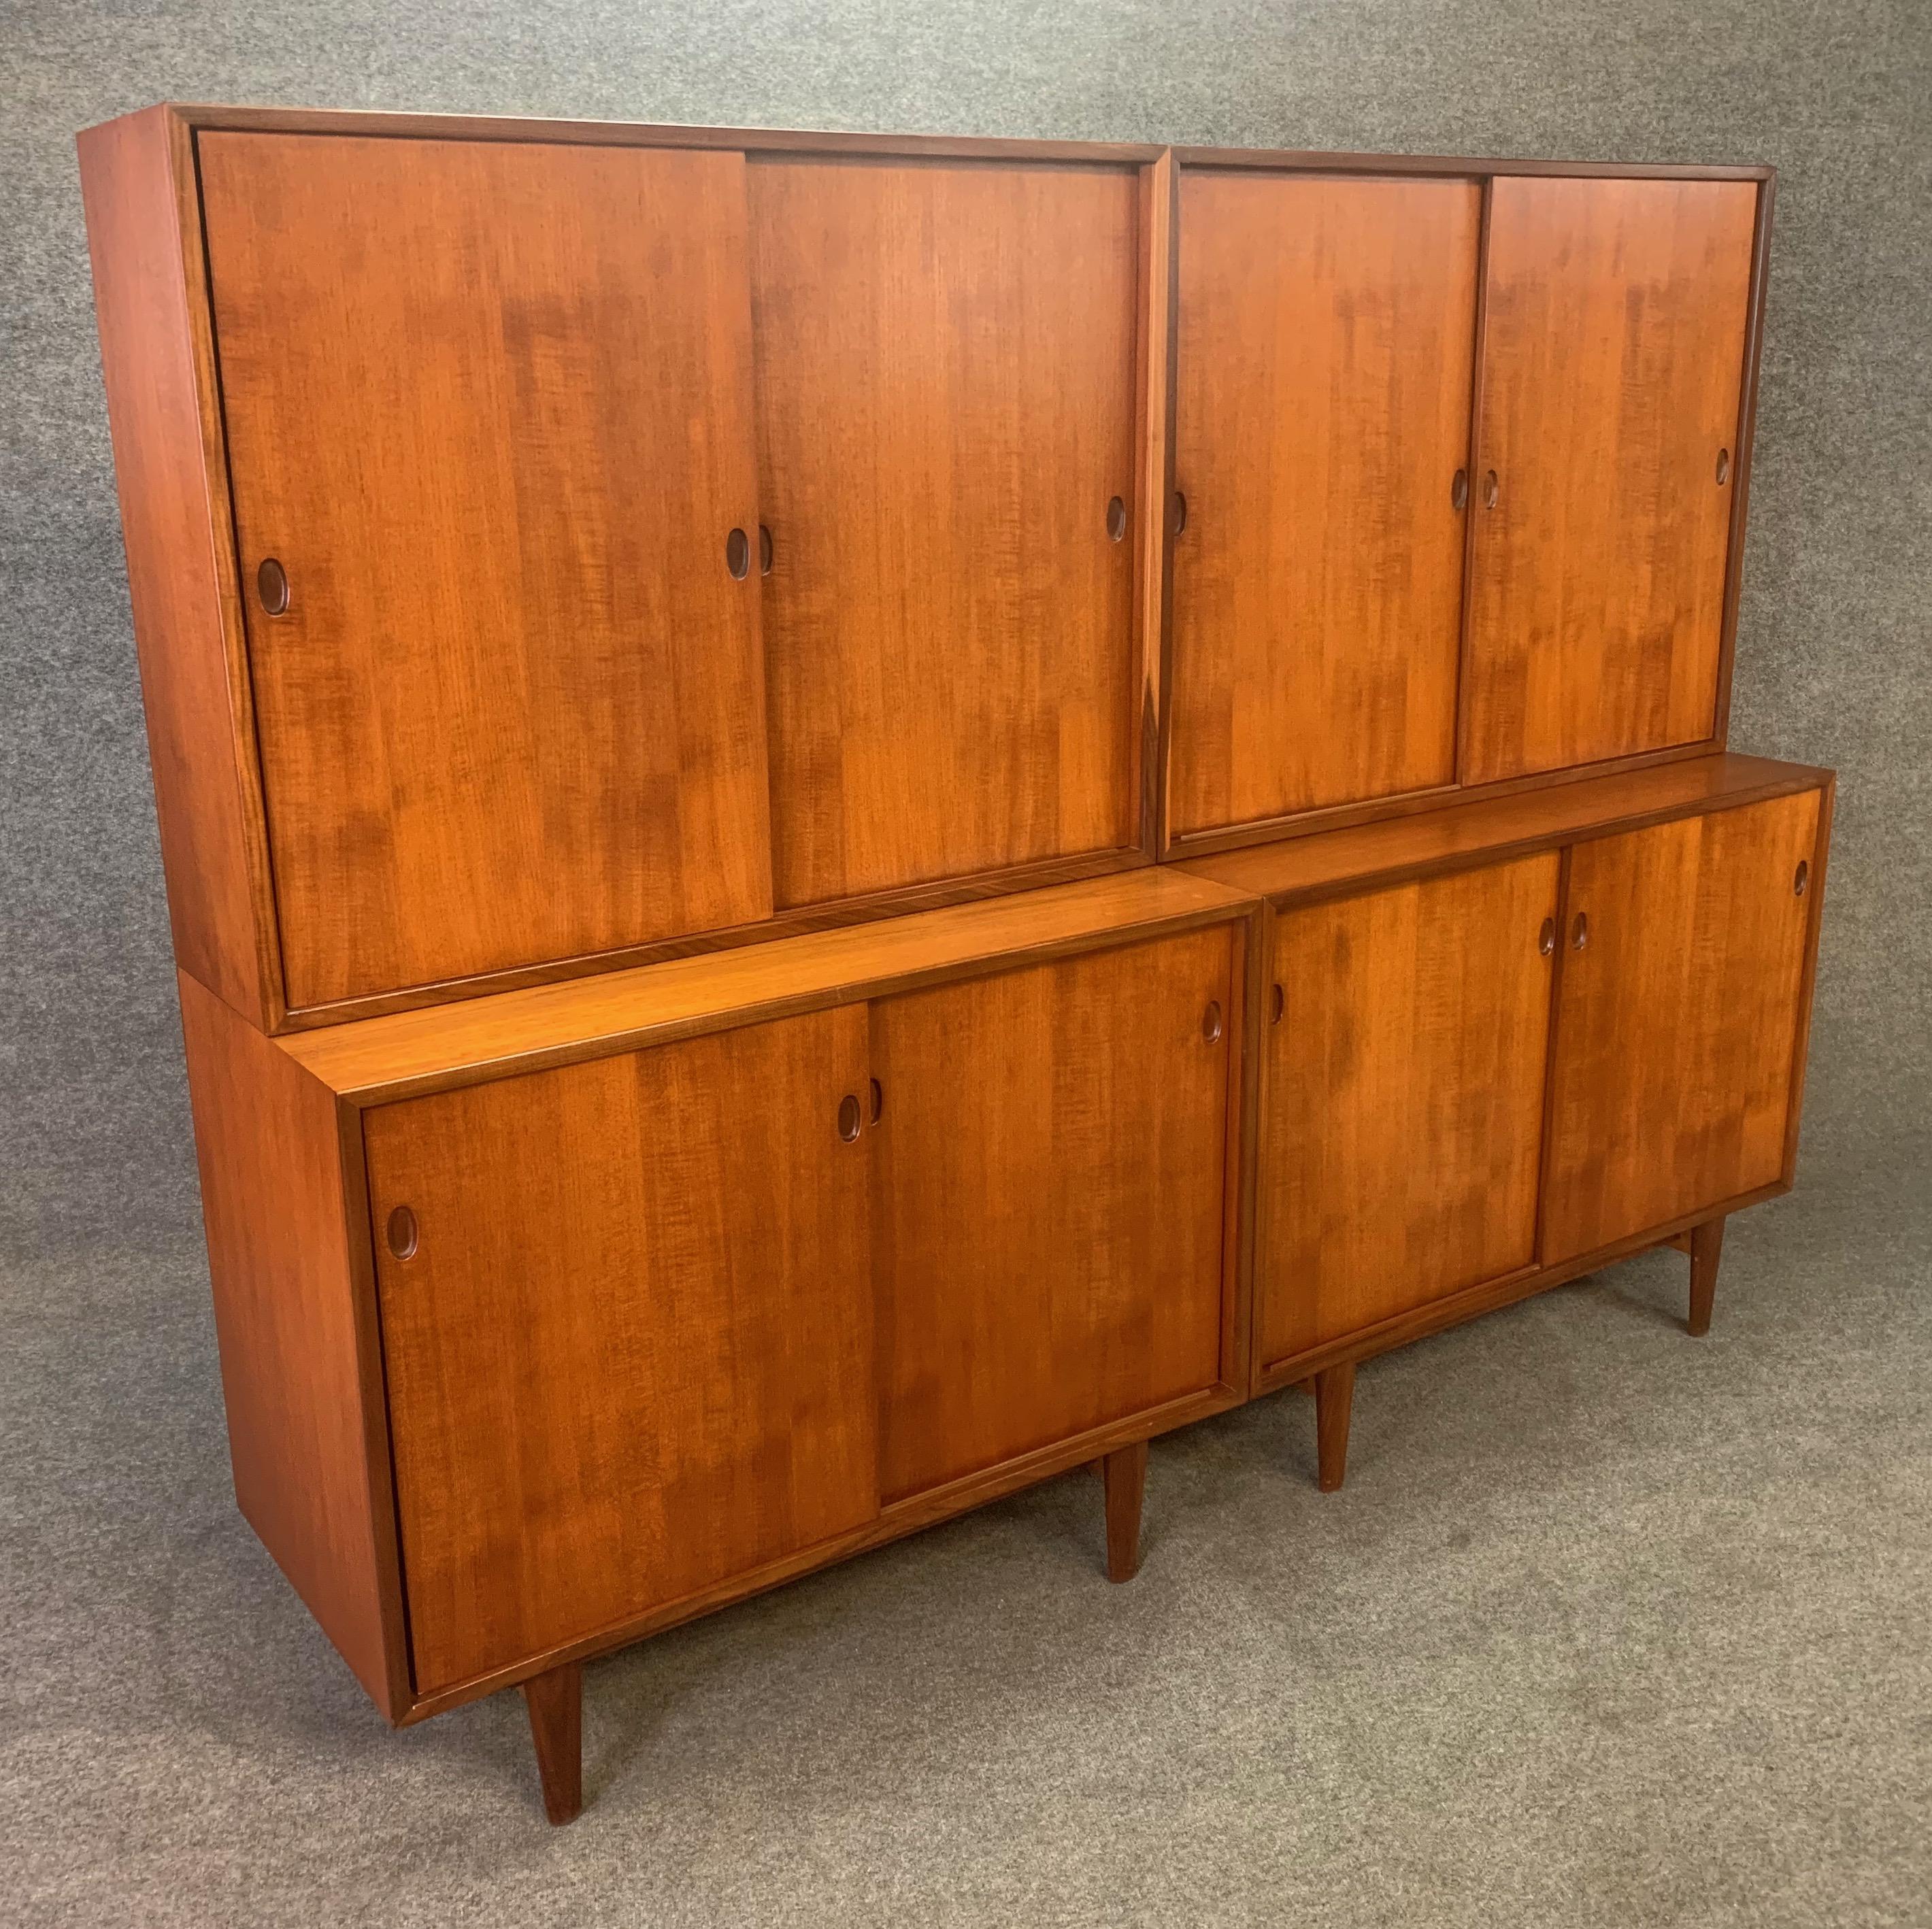 Here is a beautiful and large scandinavian modern pair of cupboard cabinets - hutches designed by Kofod Larsen and manufactured by Brande Møbelfabrik in Denmark in the late 1950s.
This rare specimen was ordered in Denmark after WW2 by a family